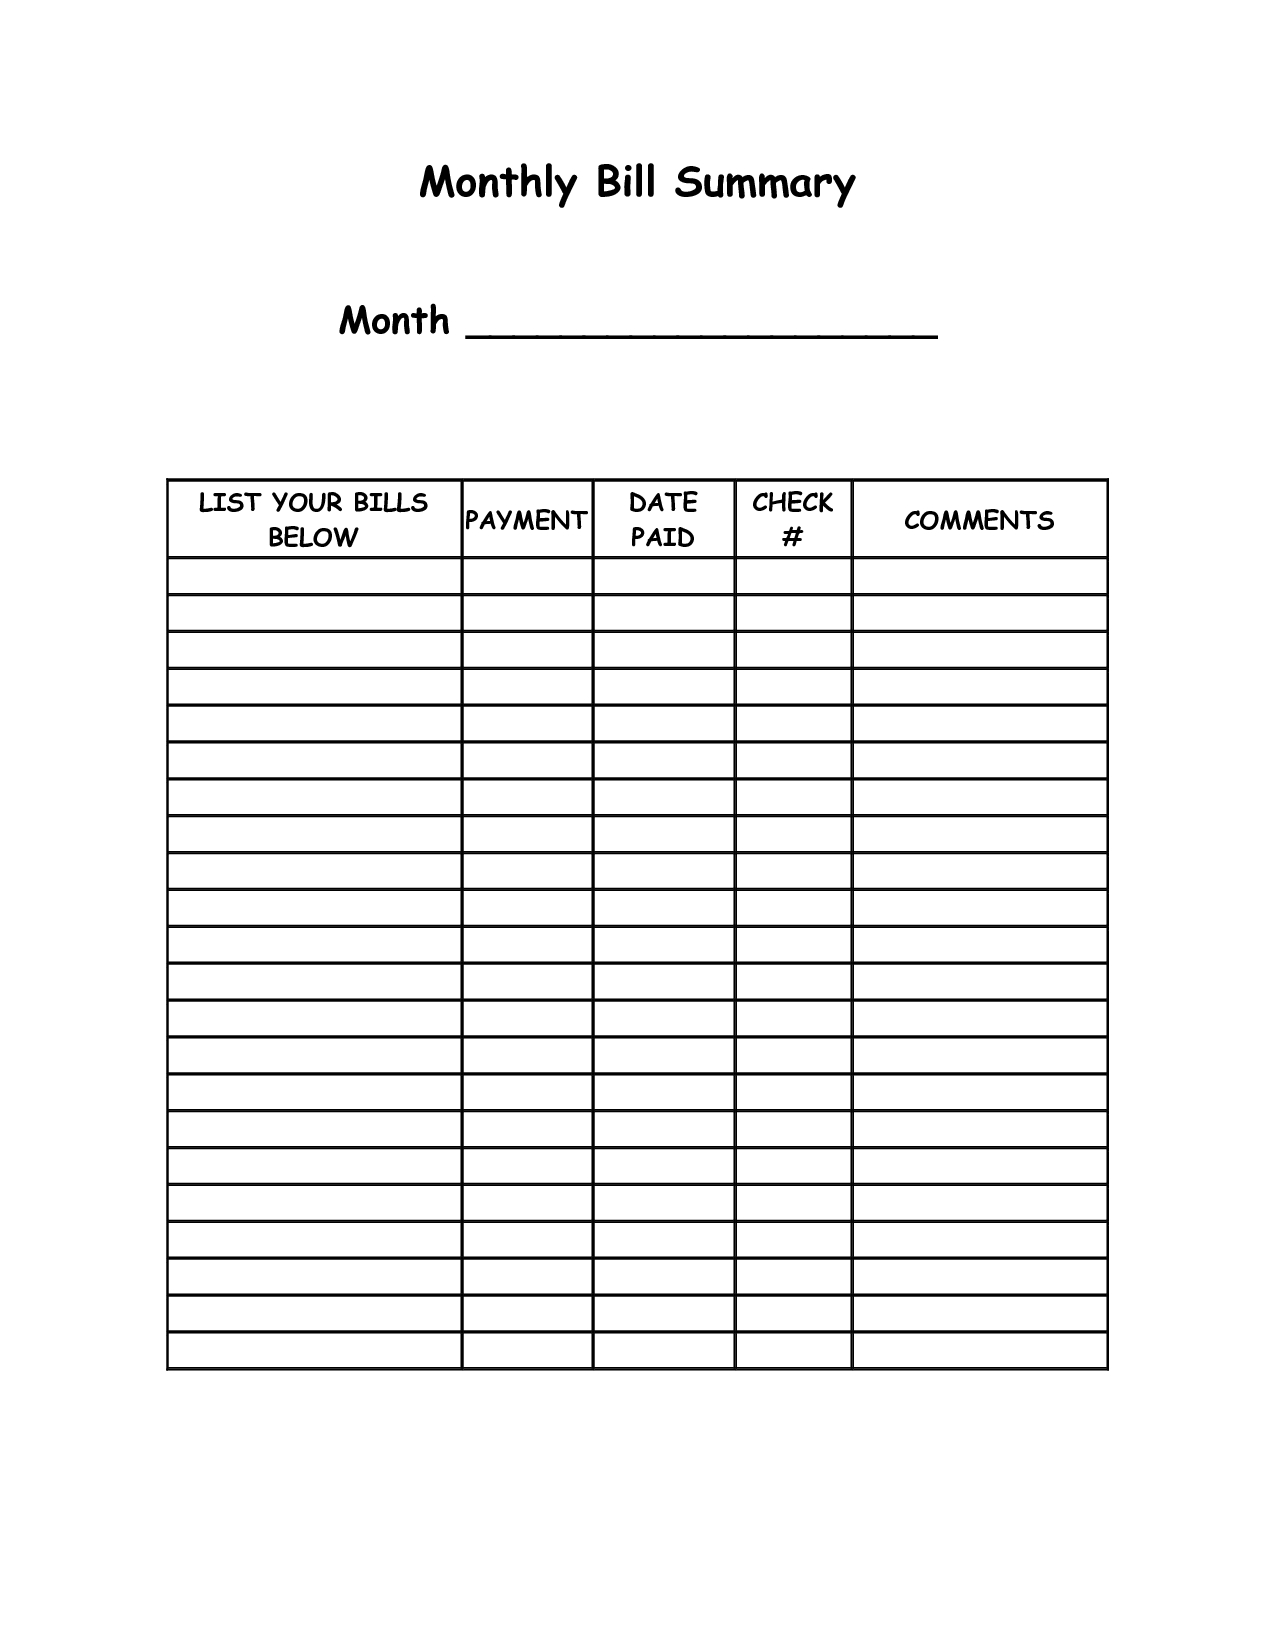 Monthly Bill Summary Doc | Monthly Bill, Organizing Monthly  Monthly Bill Payment Worksheet Printable